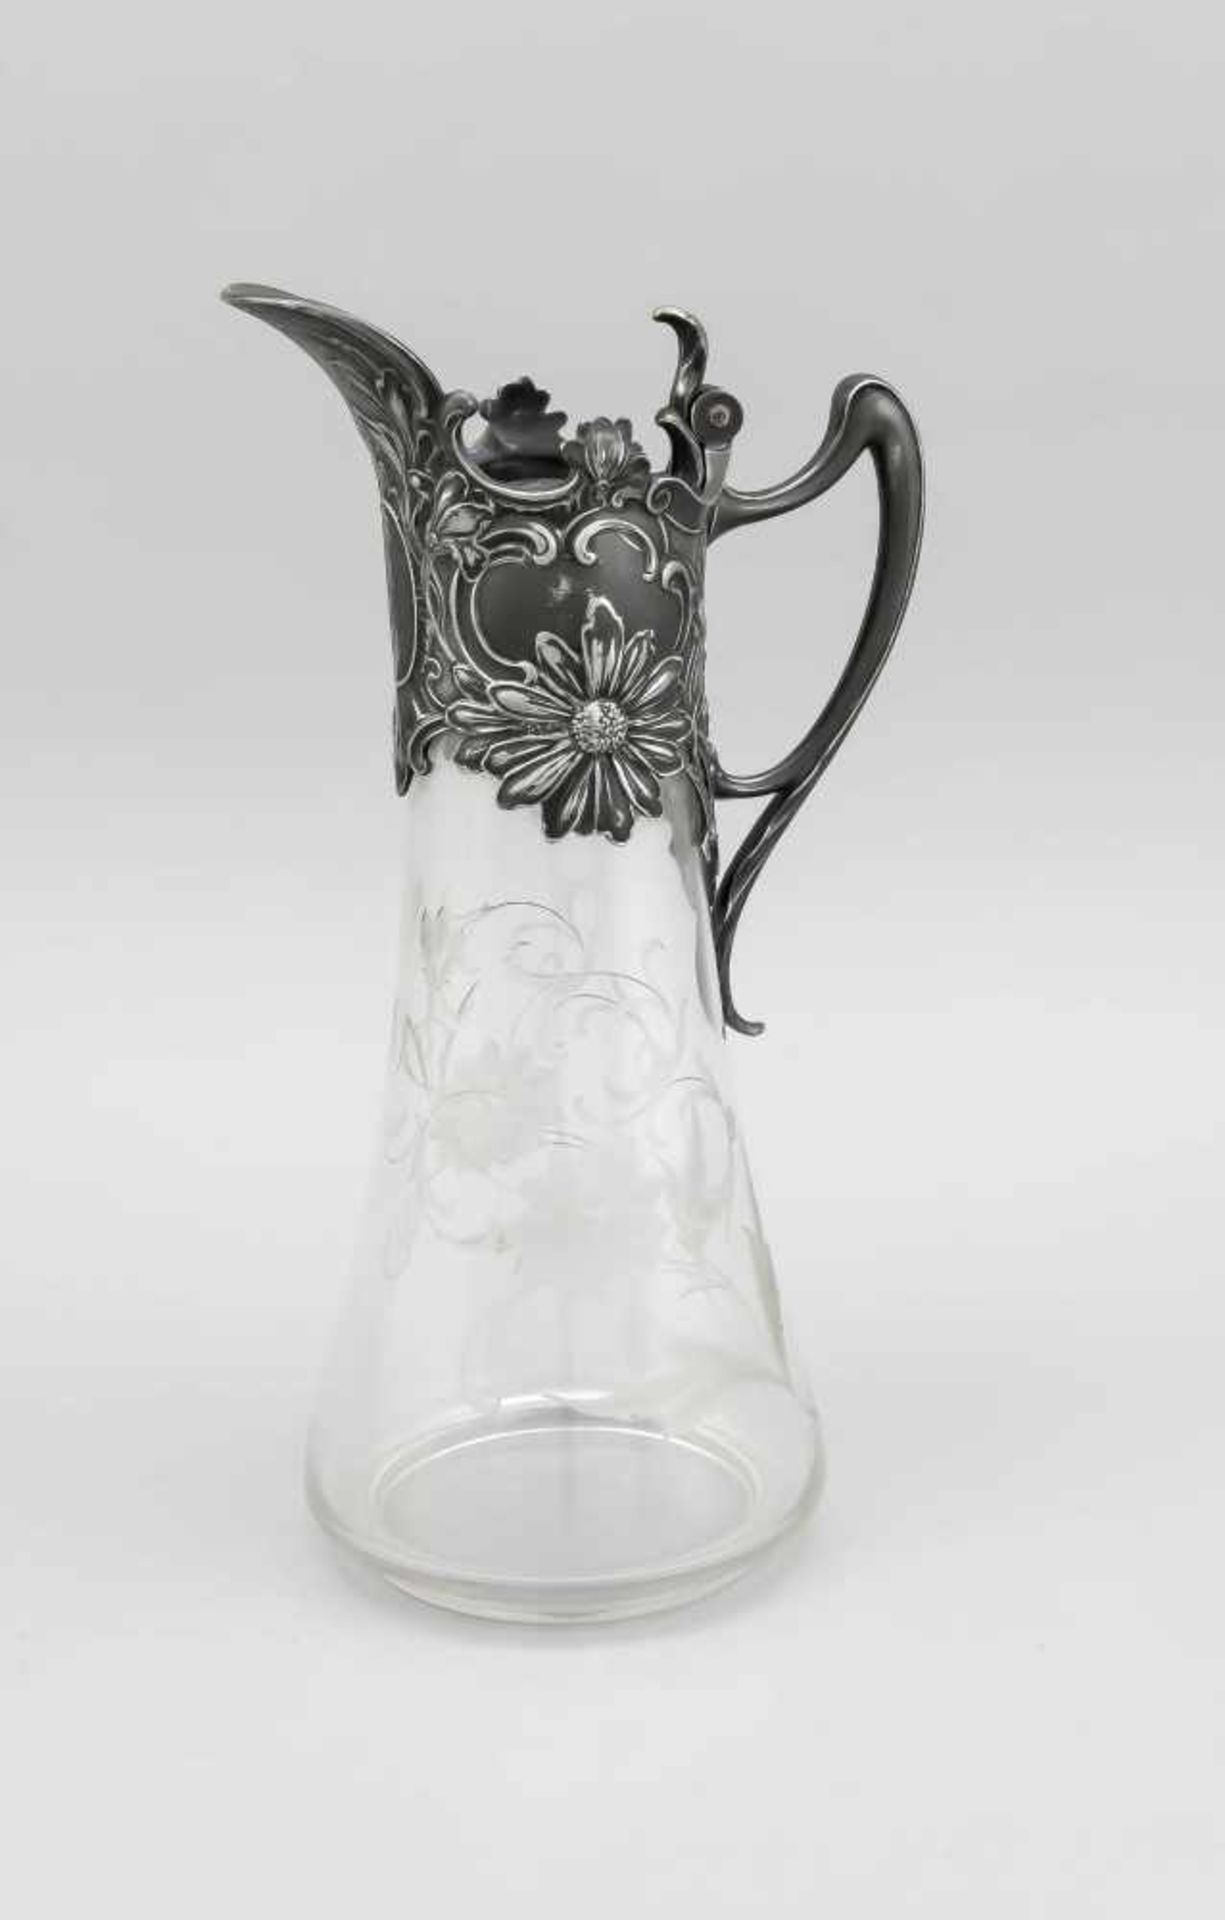 Wine carafe, German, around 1900, WMF ostrich mark, plated, curved handle, hinged lid,wall with